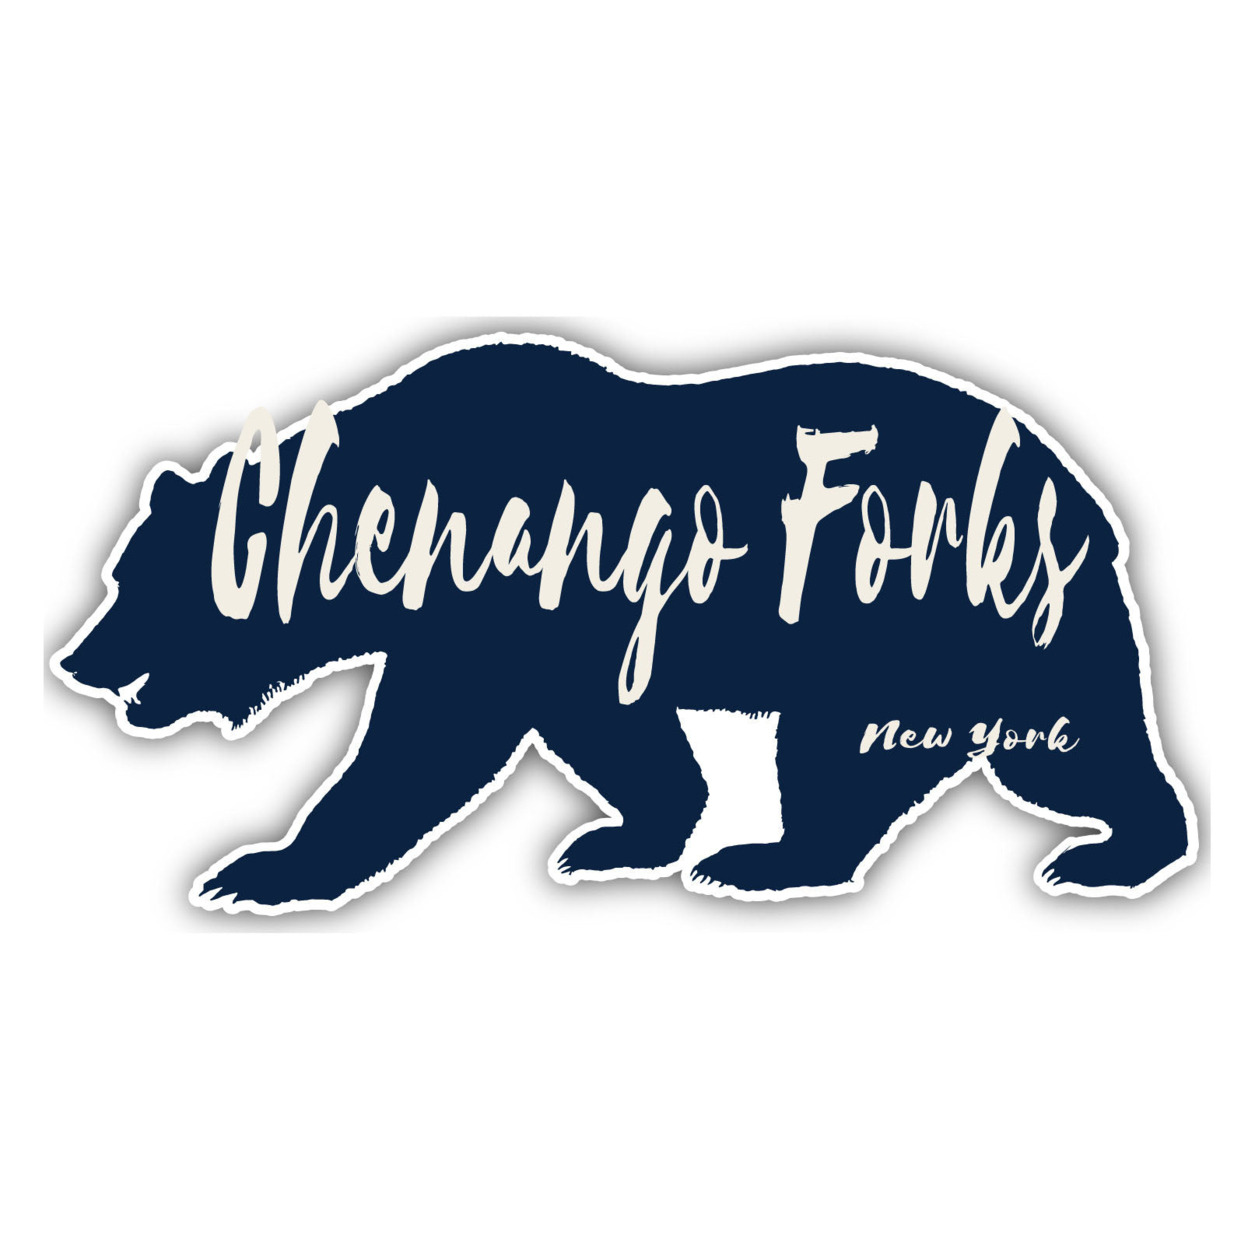 Chenango Forks New York Souvenir Decorative Stickers (Choose Theme And Size) - 4-Pack, 10-Inch, Bear